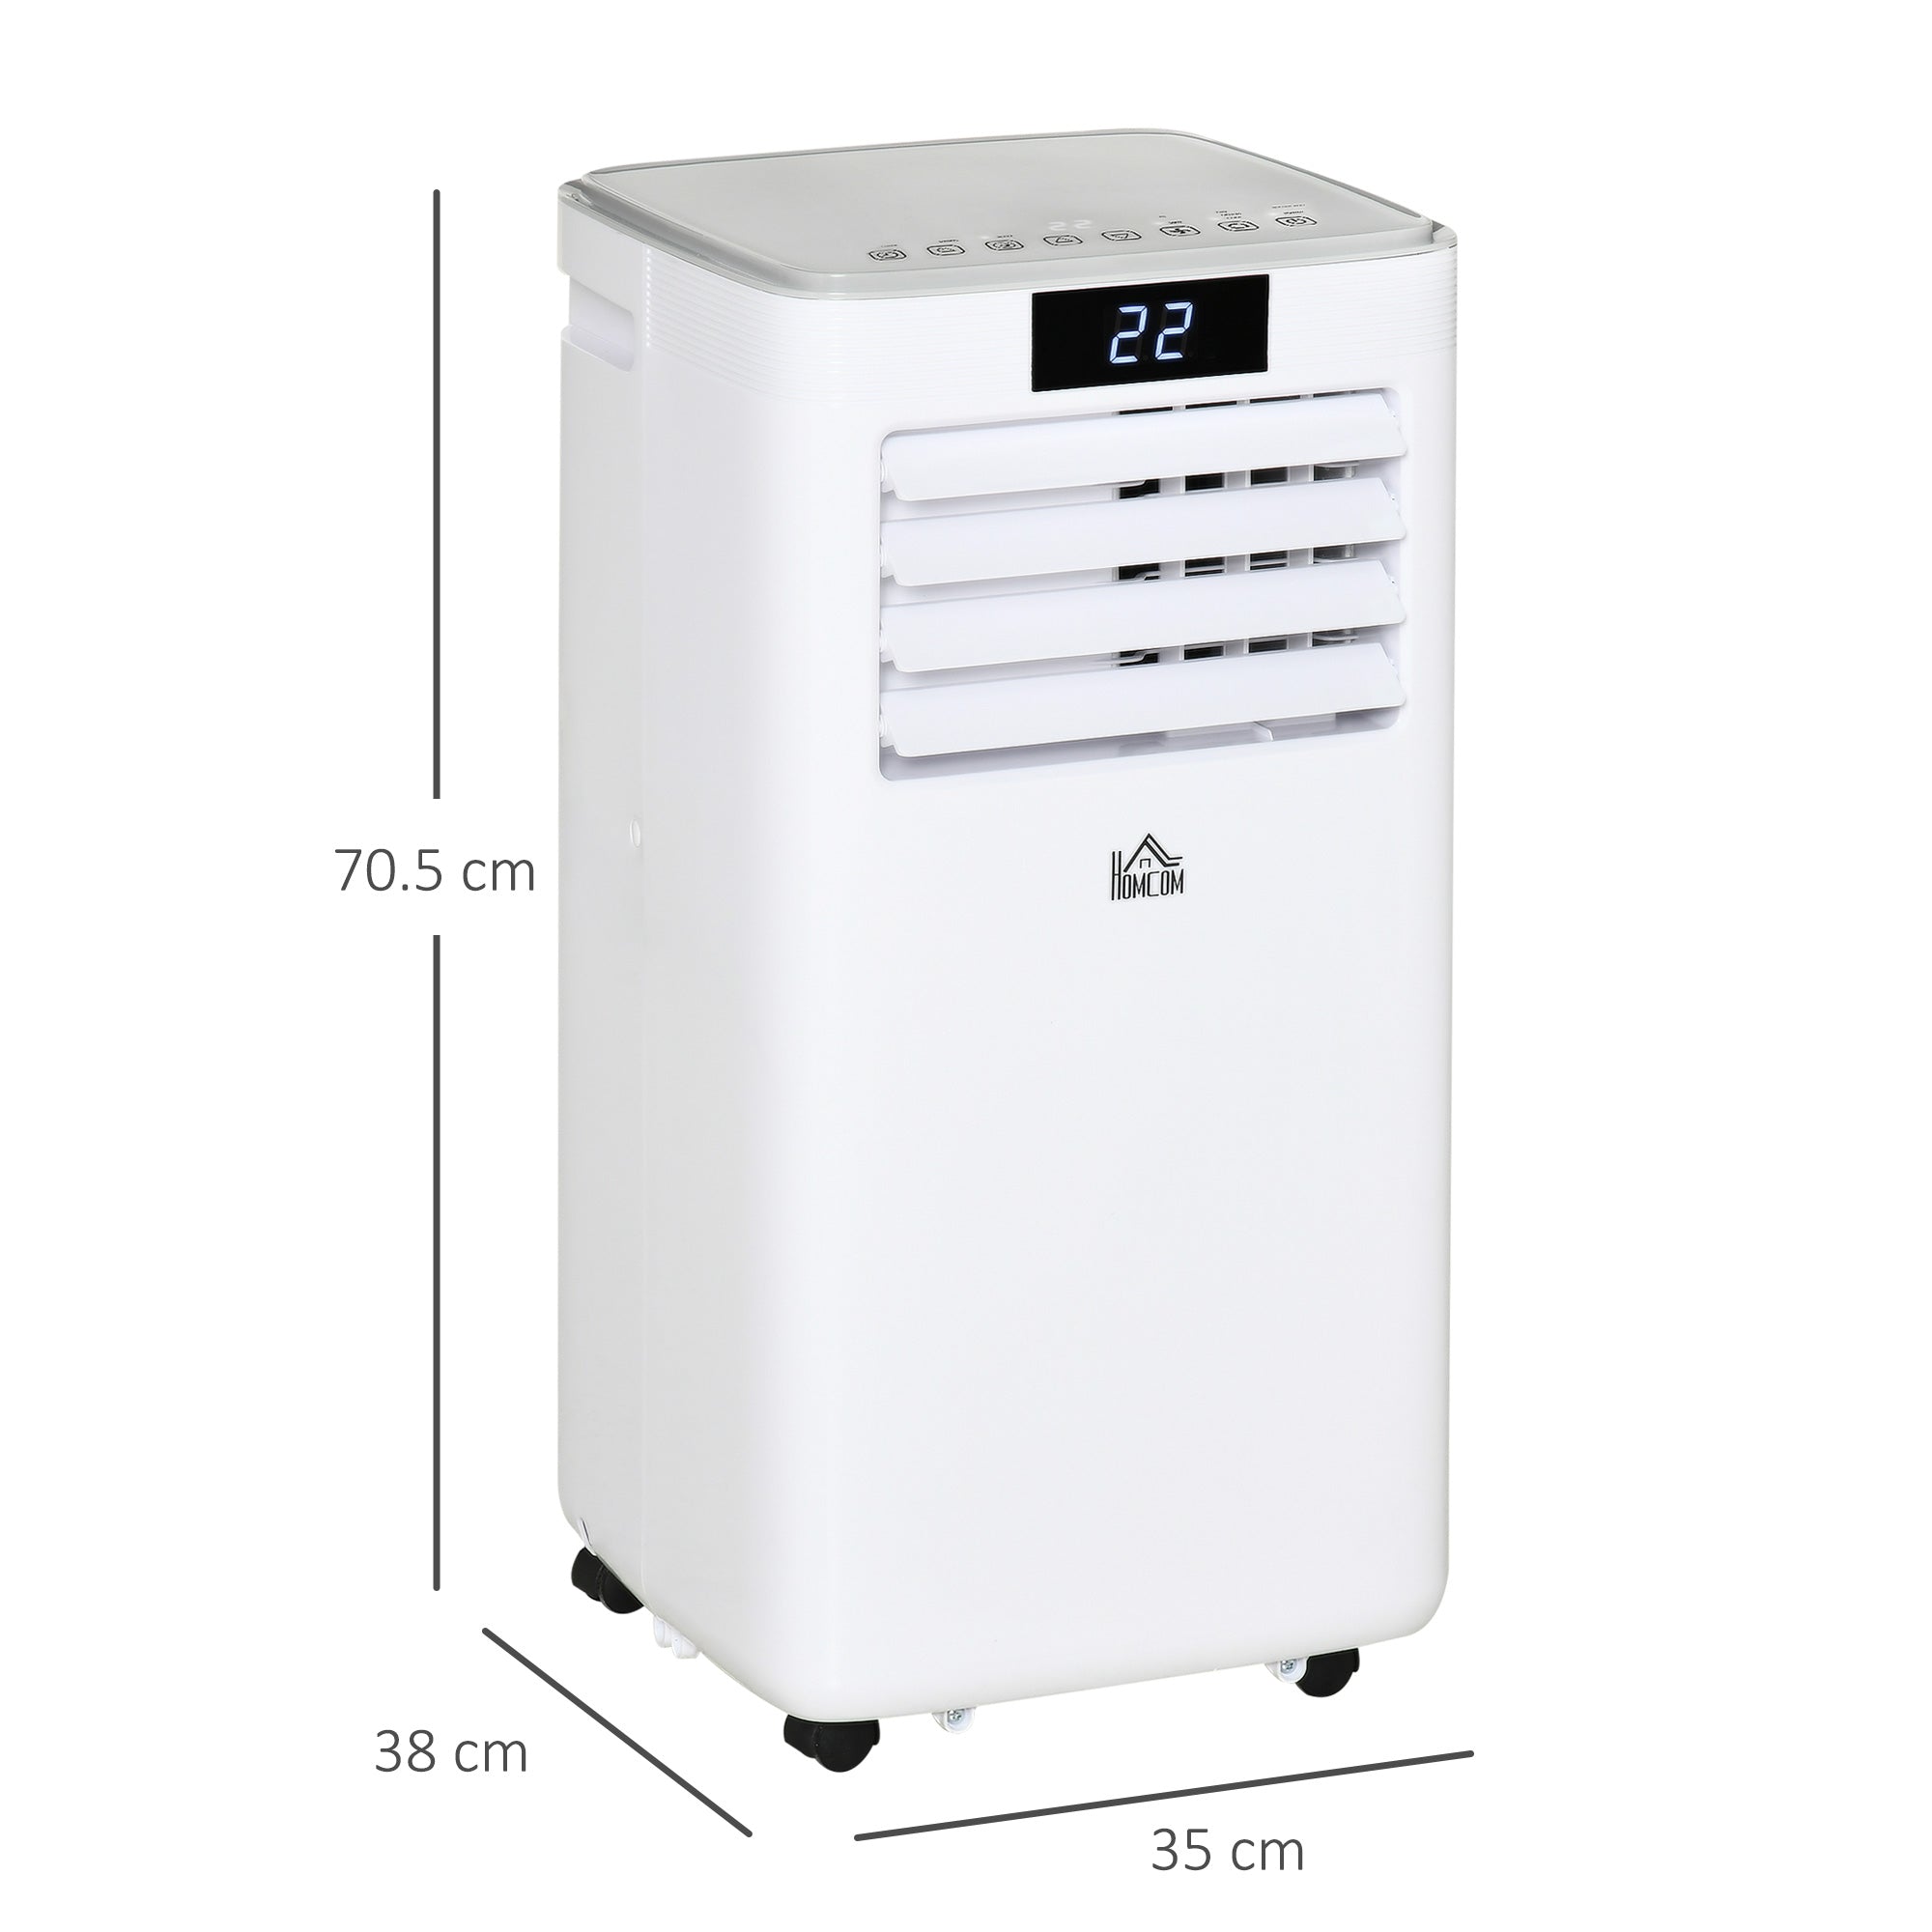 HOMCOM 7000 BTU Mobile Air Conditioner Portable AC Unit for Cooling Dehumidifying Ventilating with Remote Controller, LED Display, Timer, White